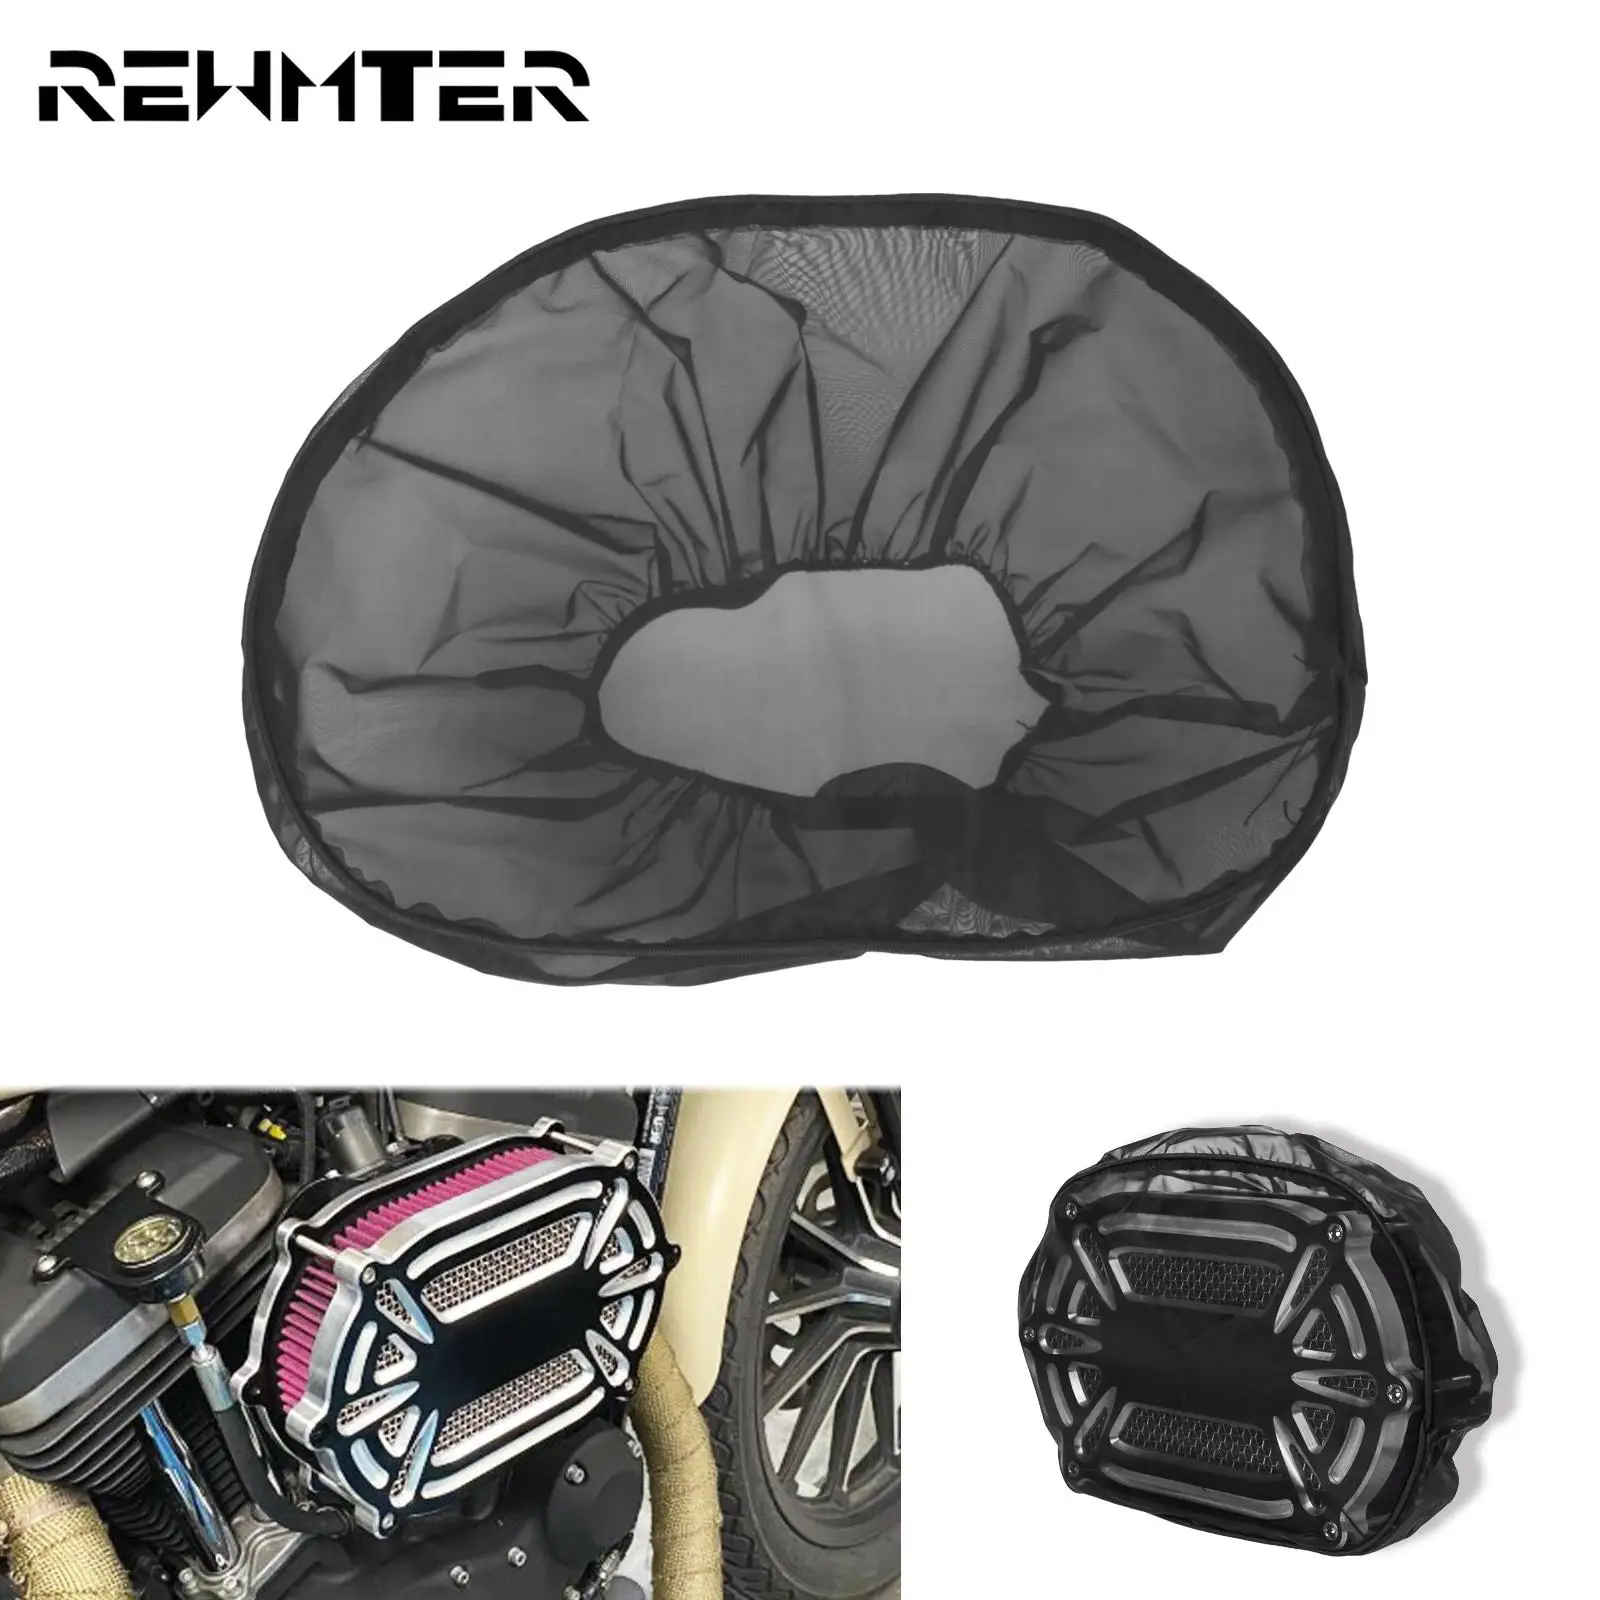 

Motorcycle Waterproof Air Filter Rain Sock Air Intake Cleaner Dustproof Protective Cover For Harley Dyna Softail XL Touring FLHT